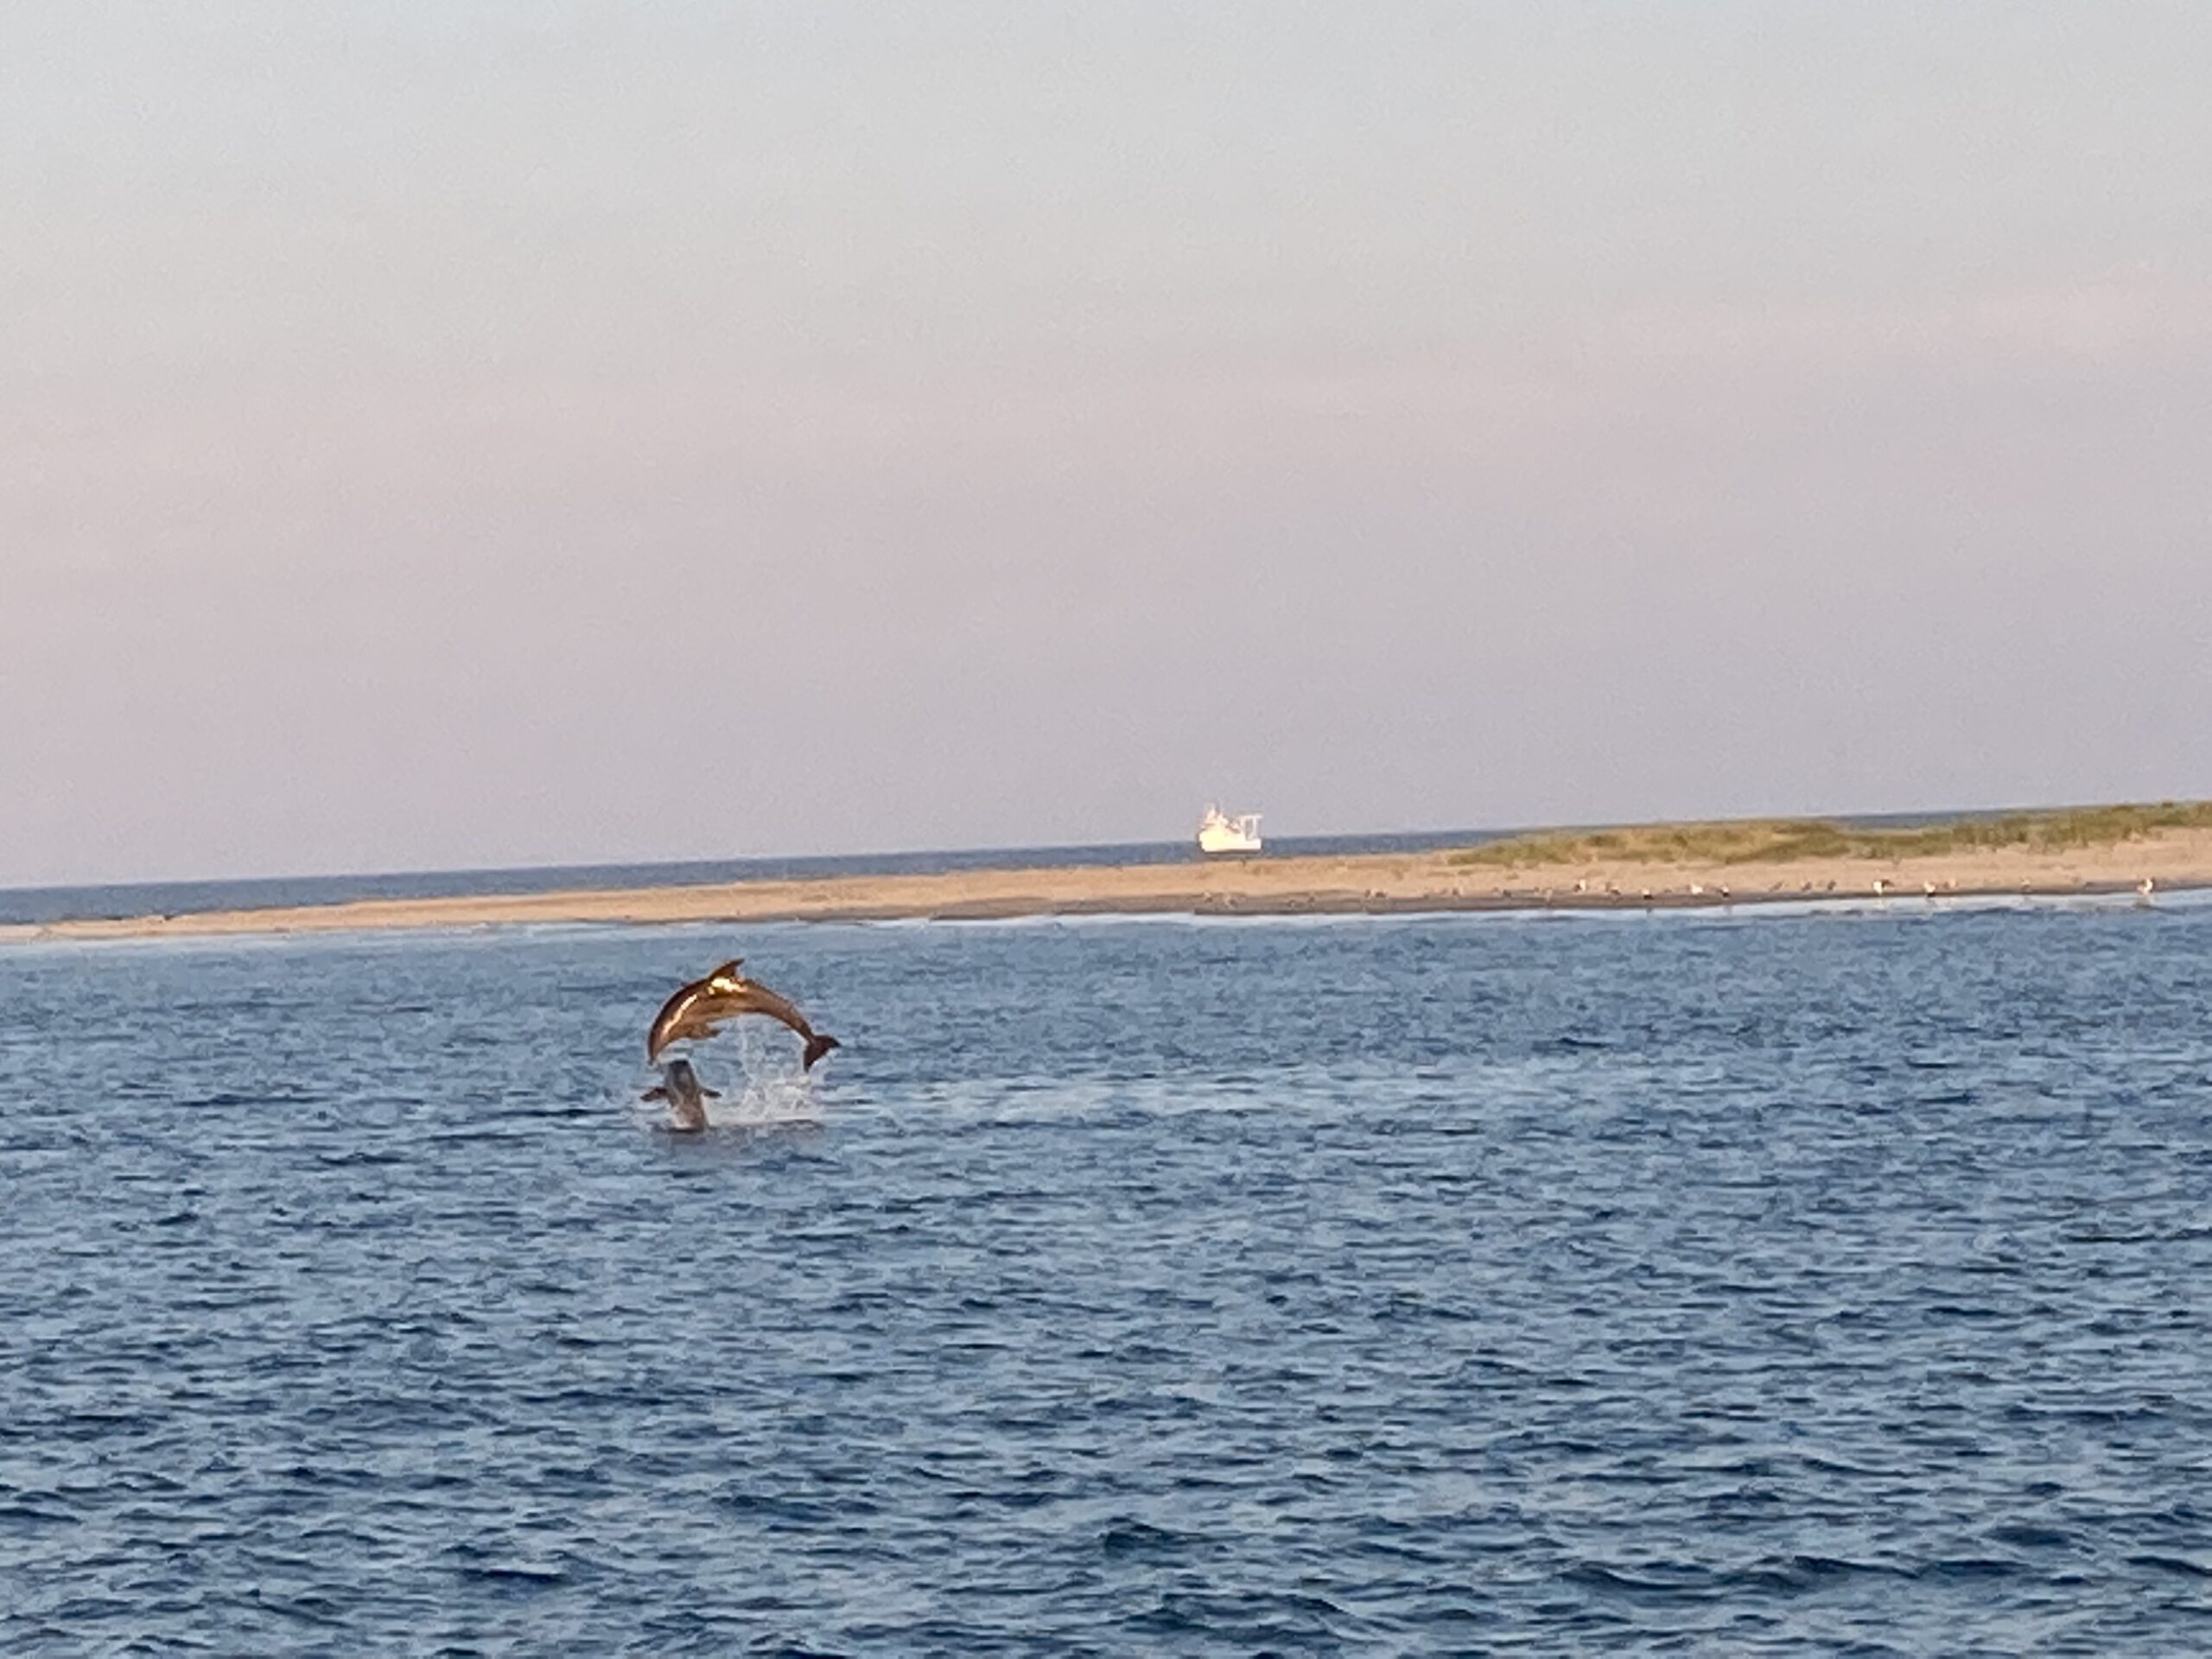 Dolphins off the coast of Lewes, Delaware